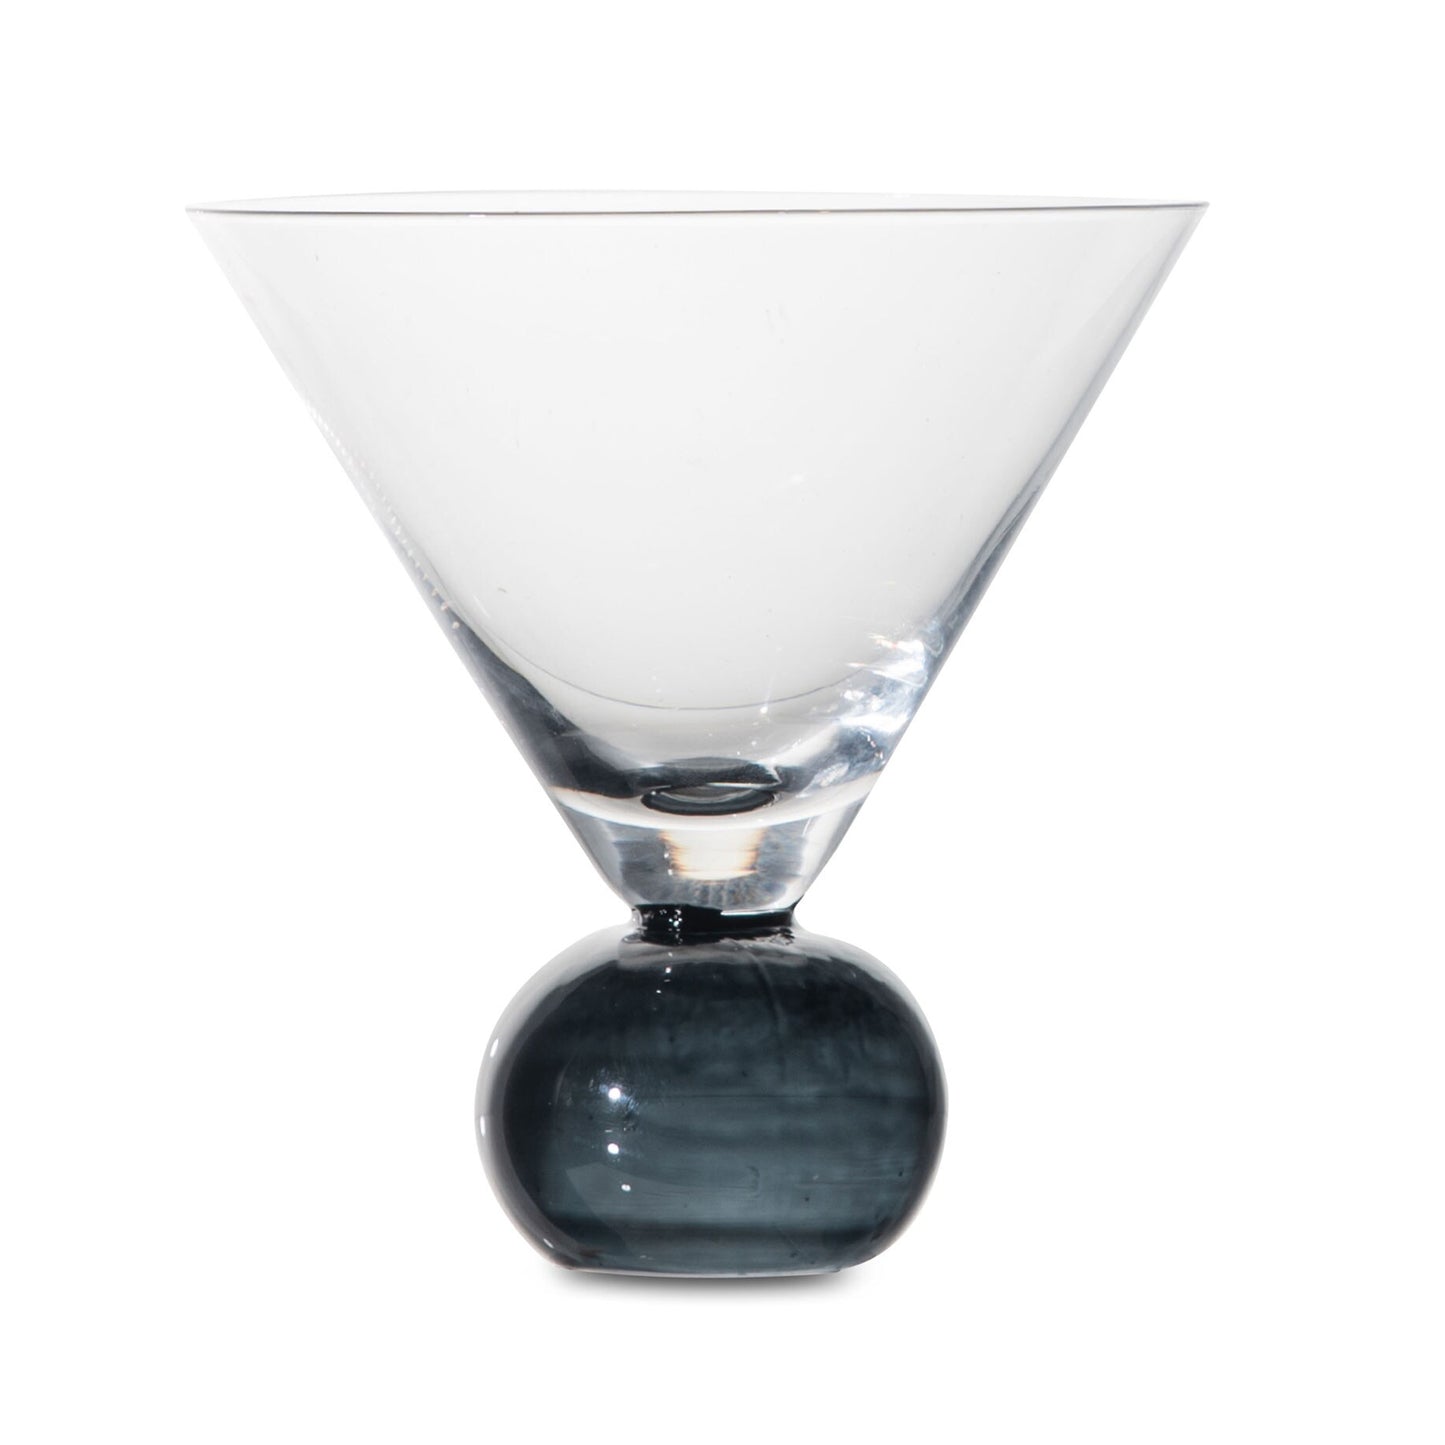 ByON by Widgeteer Spice Martini Glasses, Set of 4